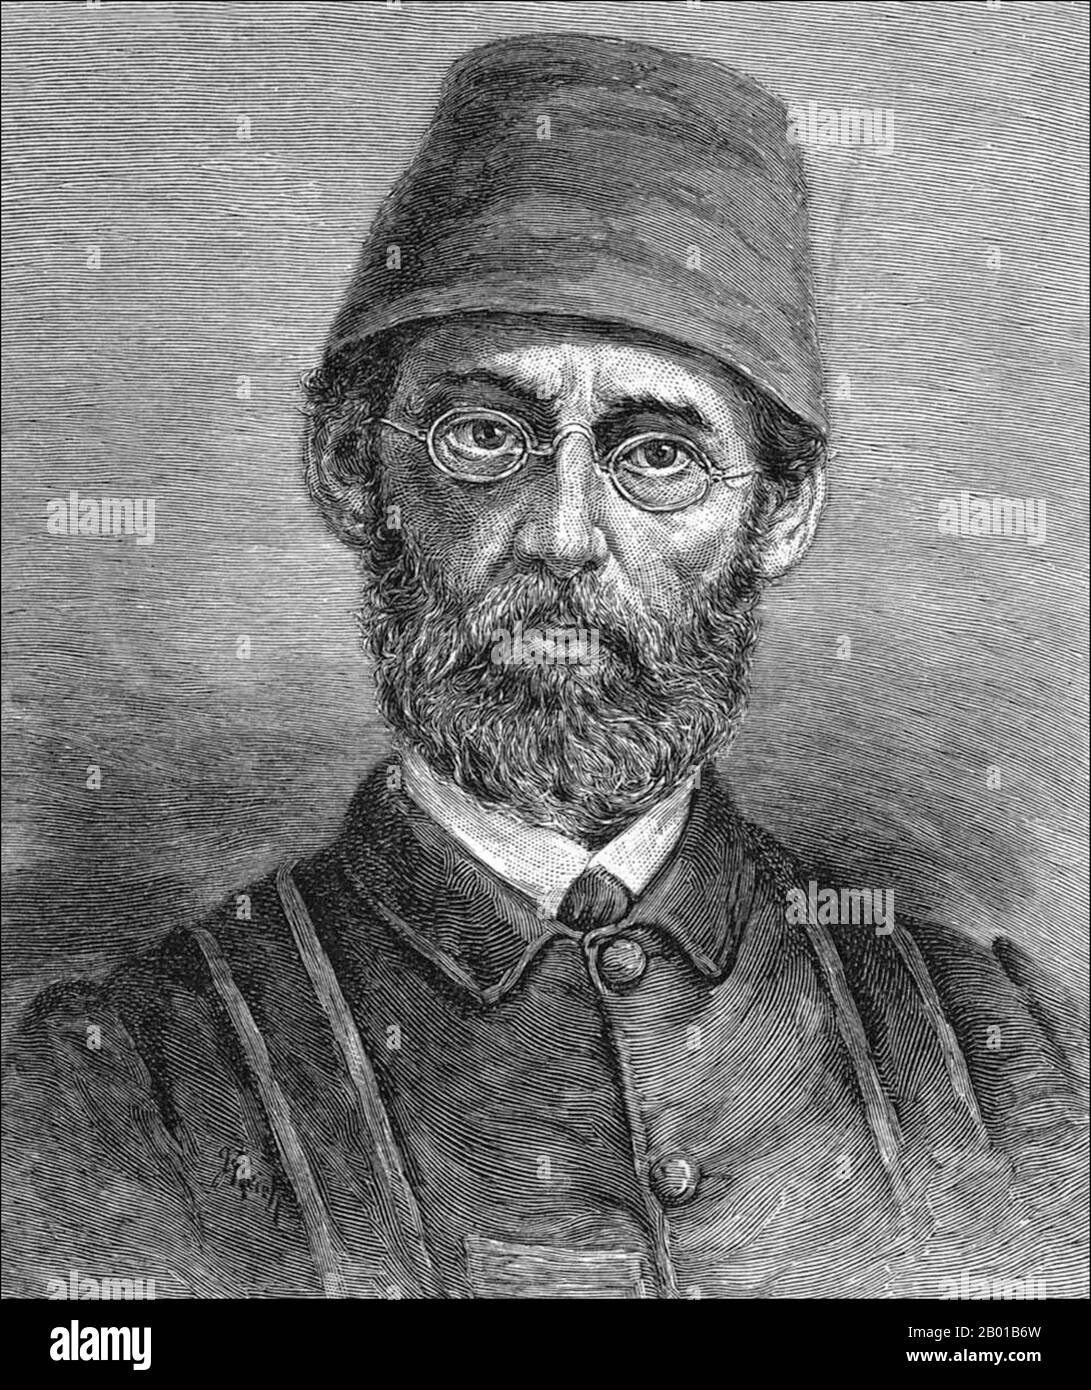 South Sudan: Mehmet Emin Pasha (28 March 1840 - 23 October 1892), physician, naturalist and governor of Equatoria. Portrait, 1890.  Mehmet Emin Pasha, born Isaak Eduard Schnitzer, was an Ottoman physician of German Jewish origin, who served as governor of the Egyptian province of Equatoria (modern southern South Sudan).  Emin Pasha was appointed as governor of Equatoria by the Khedive of Egypt in 1878. The Mahdist War that began in 1881 cut Equatoria off from the outside world by 1883. Emin was rescued by Henry Morton Stanley and the Emin Pasha Relief Expedition in 1888. Stock Photo